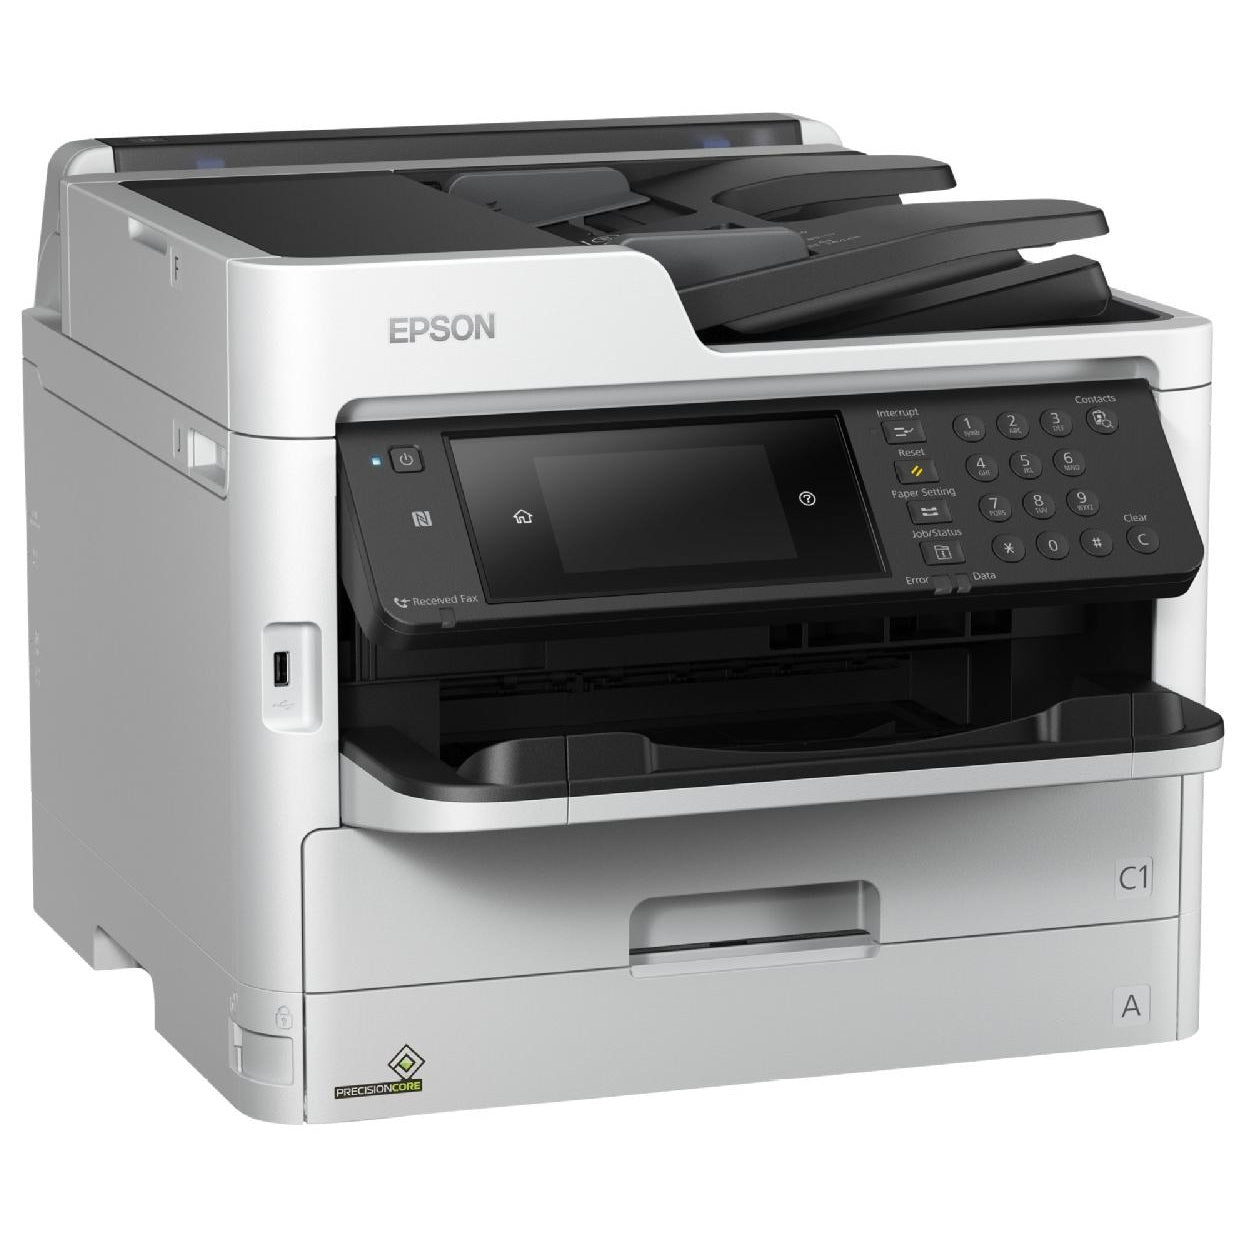 Absolute Toner $66/Month New Epson Workforce Pro WF-M5799 Supertank Monochrome Multifunction Printer (Print/Copy/Scan/Fax) For Office Use Showroom Color Copier